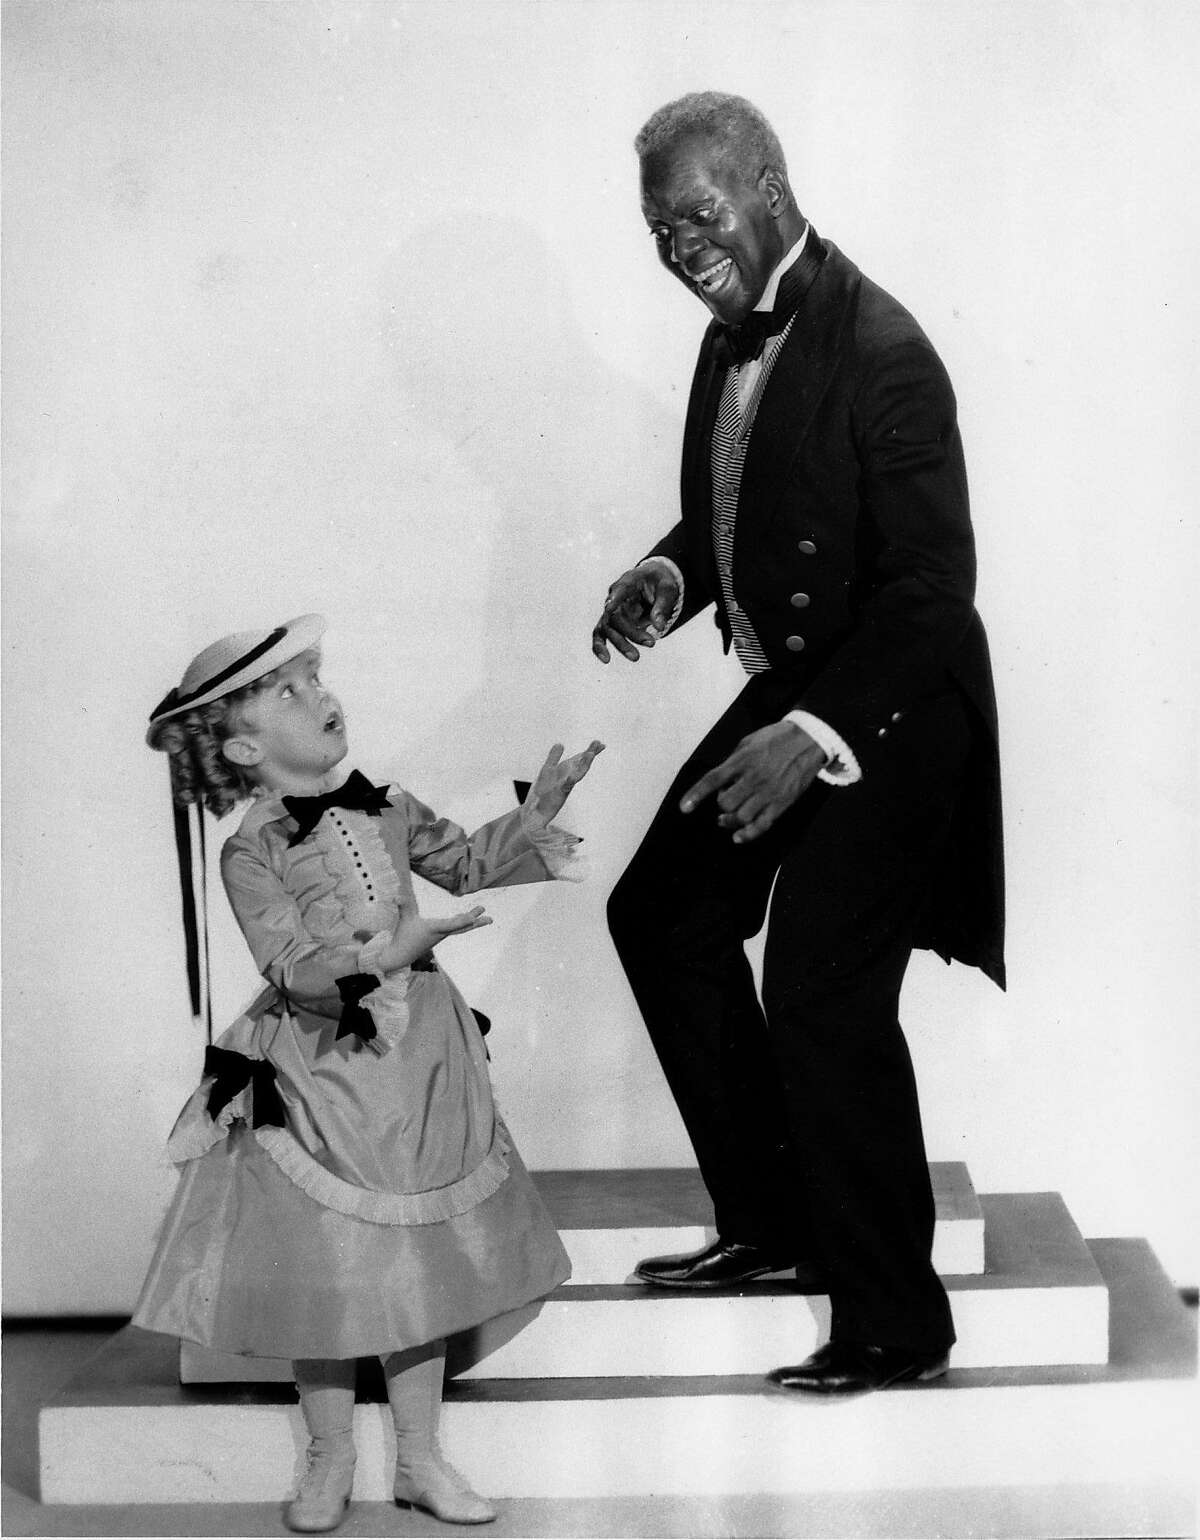 Shirley Temple and tap dancer Bill "Bojangles" Robinson are shown in a scene from the 1935 motion picture "The Little Colonel," one of four movies they appeared in together. (AP Photo)